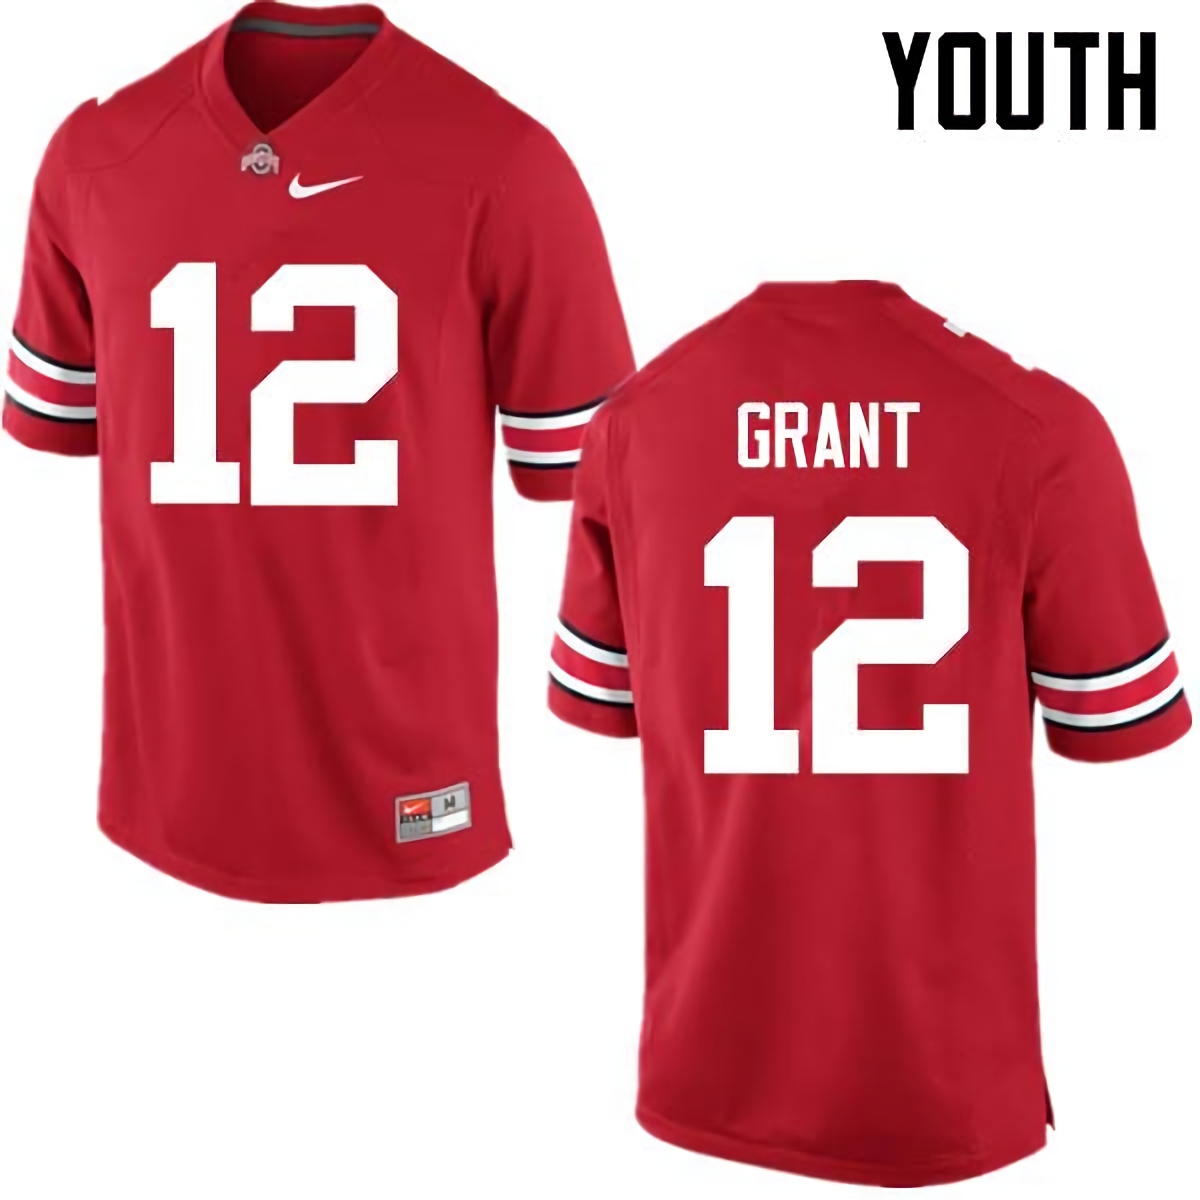 Doran Grant Ohio State Buckeyes Youth NCAA #12 Nike Red College Stitched Football Jersey ZUH2456BT